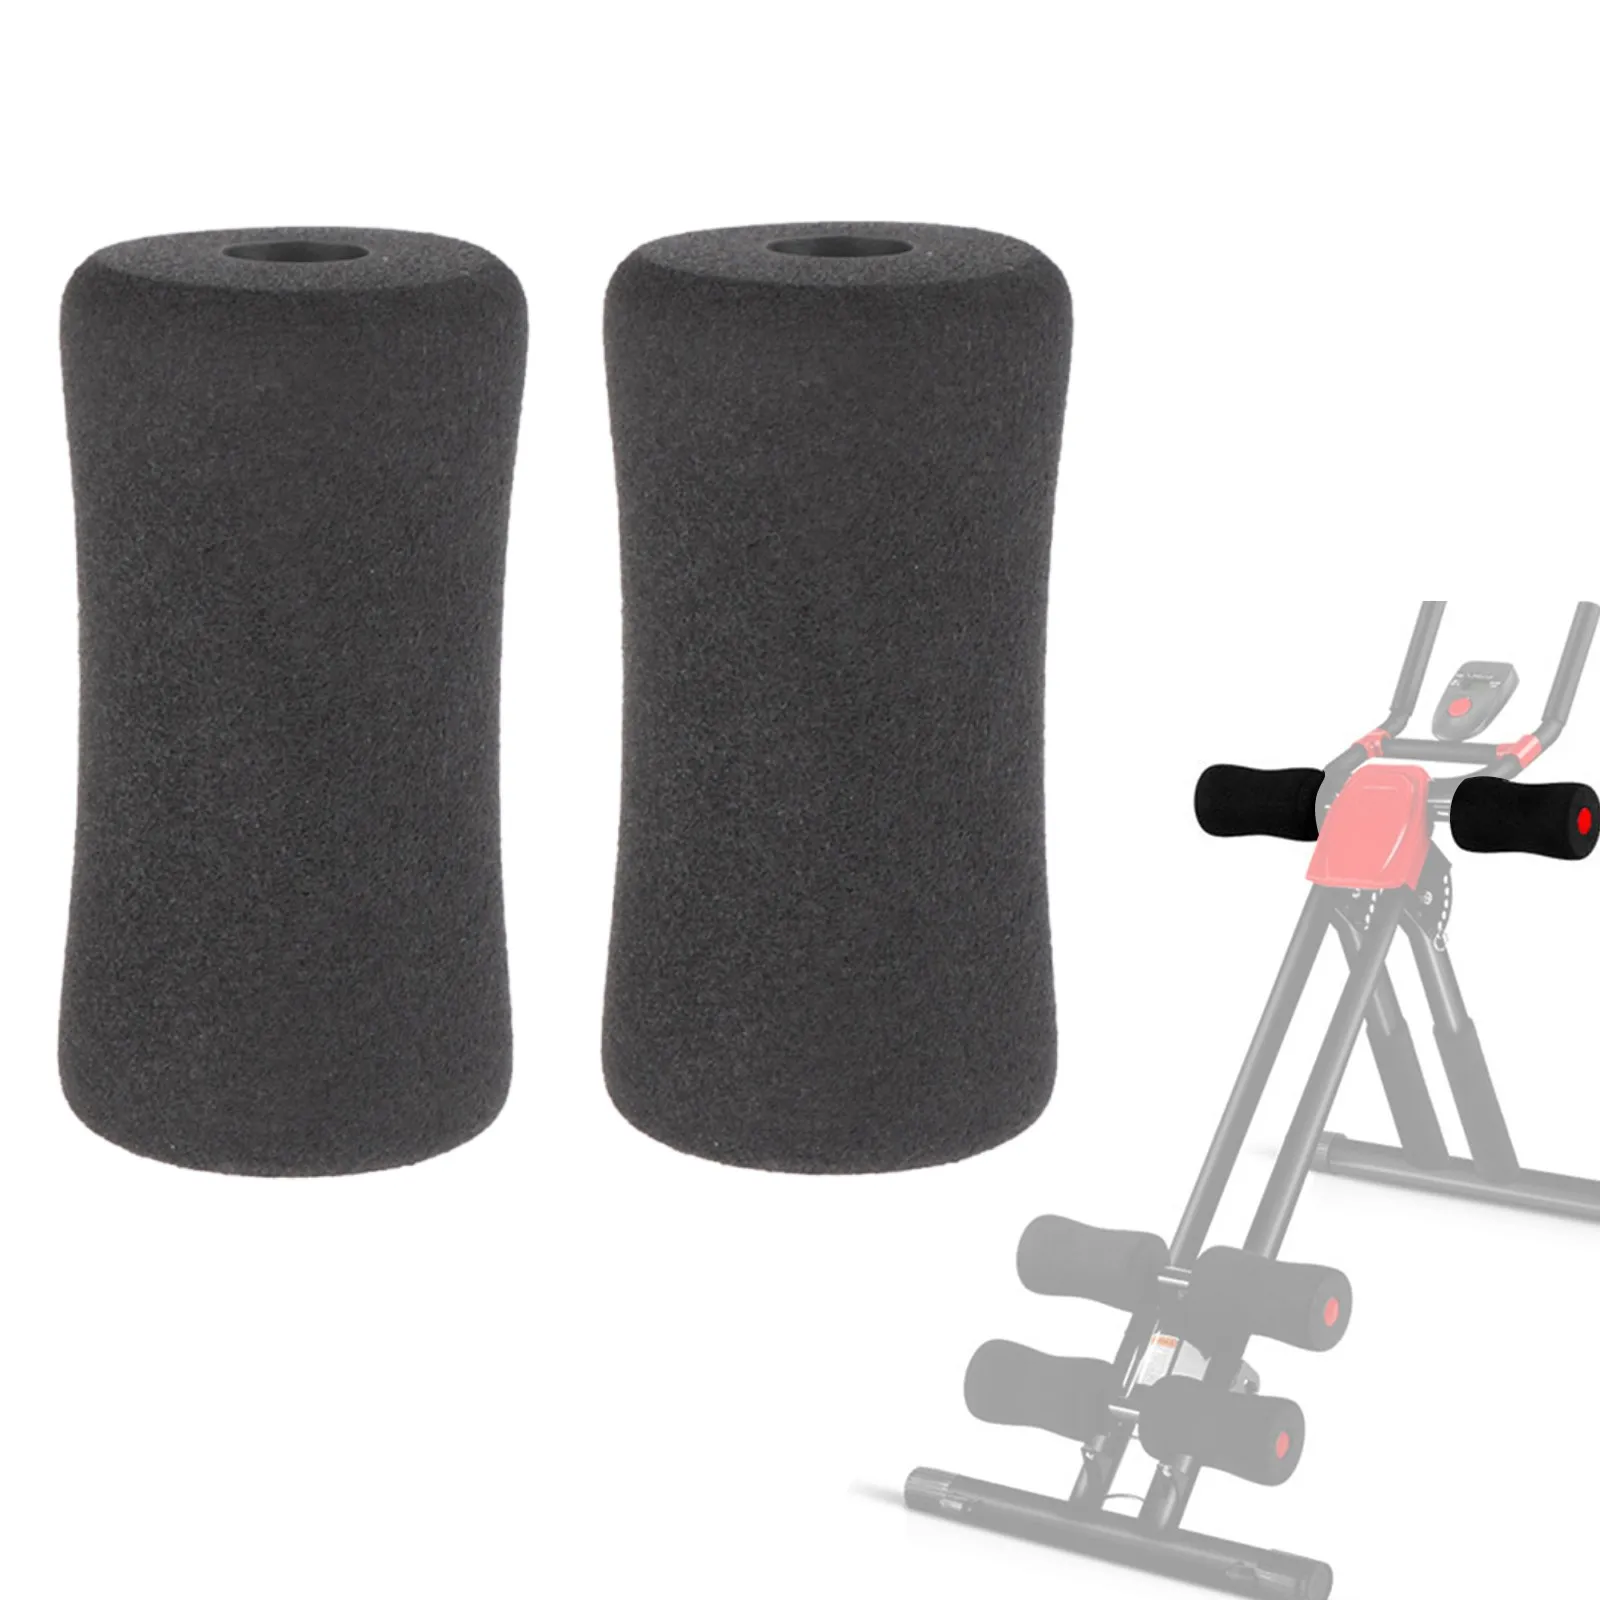 2 Pcs Foot Foam Pads Rollers Replacement For Leg Extension For Weight Bench Home Gym Exercise Machines Equipments